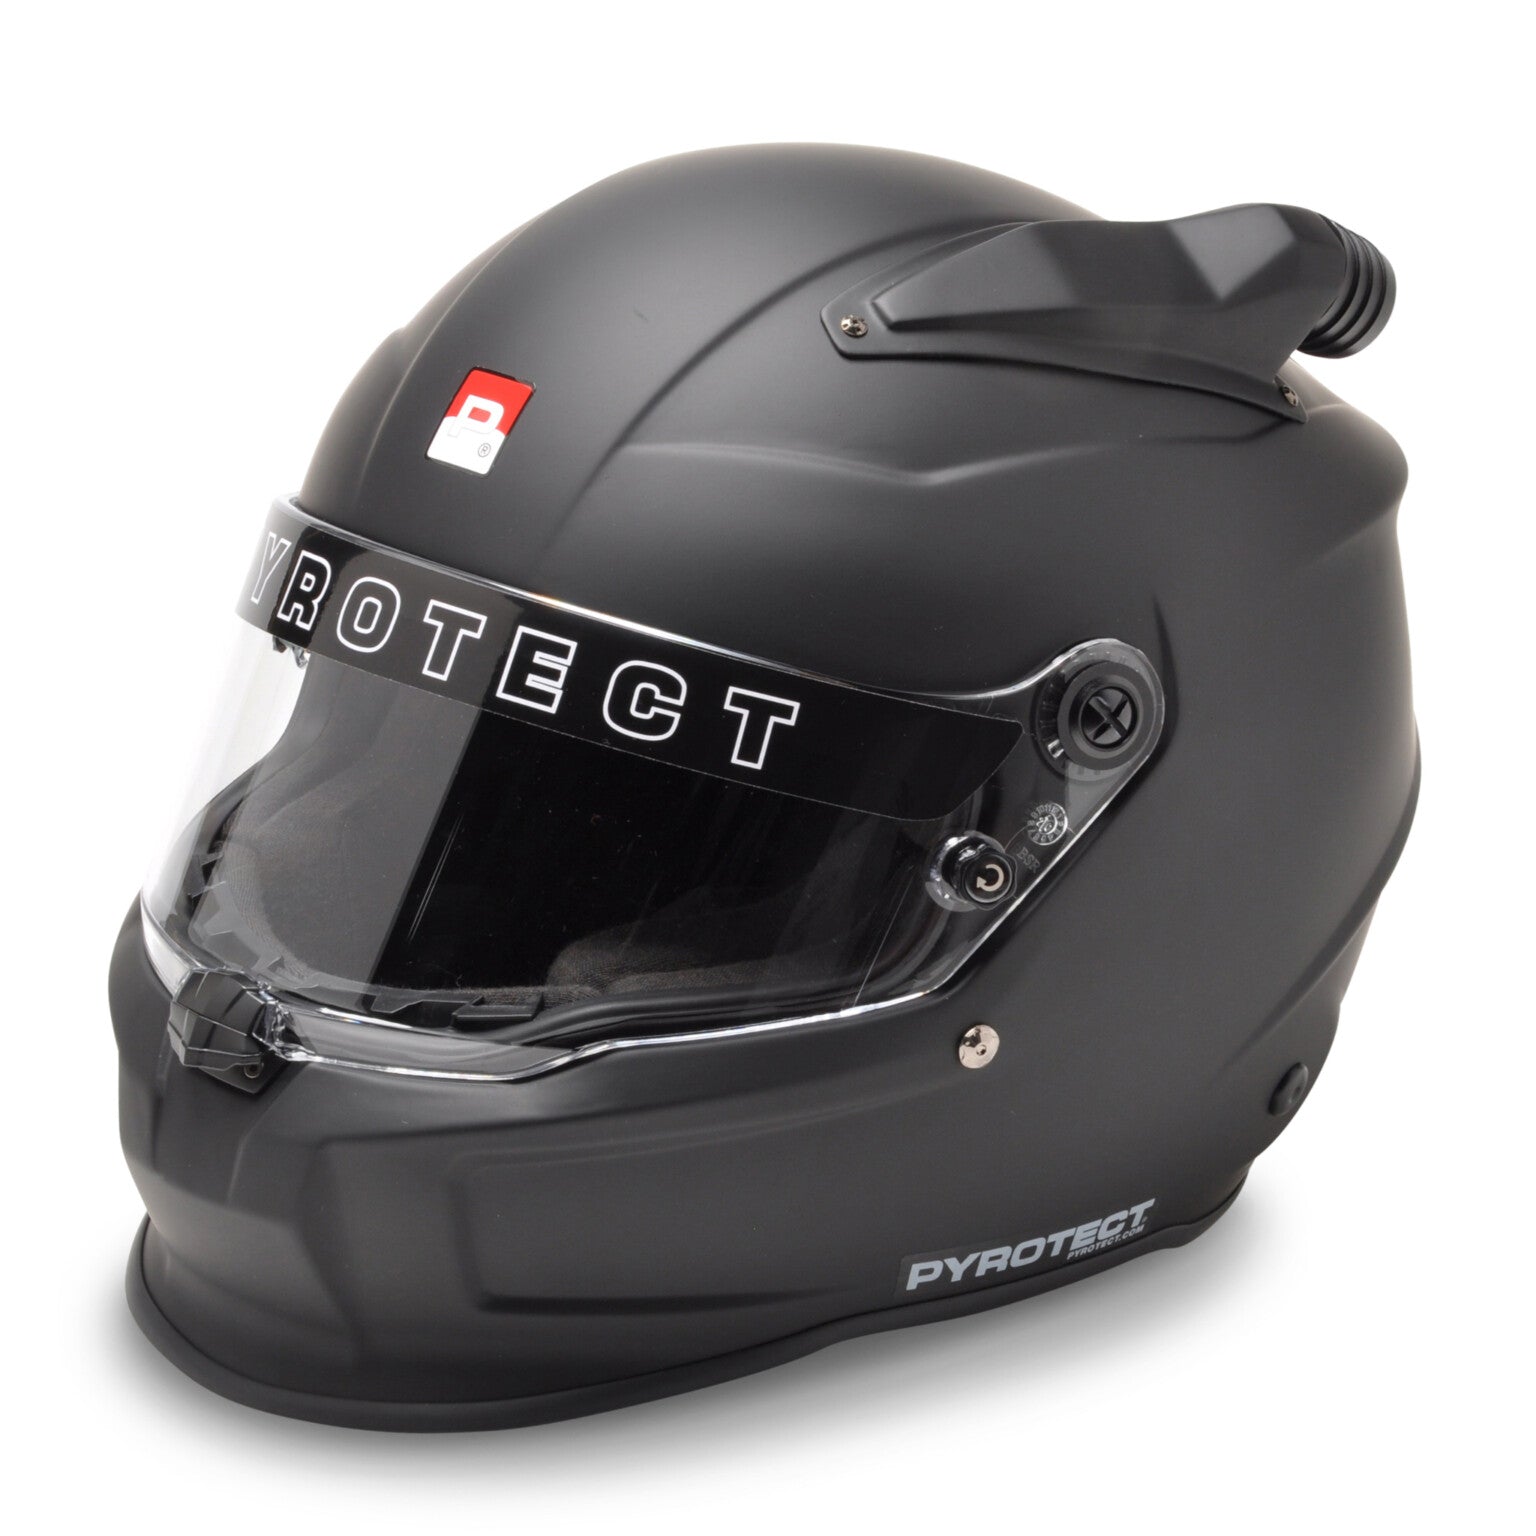 Pyrotect SA2020 Pro Air Flow Vortex Mid-Forced Air Full Face Helmet